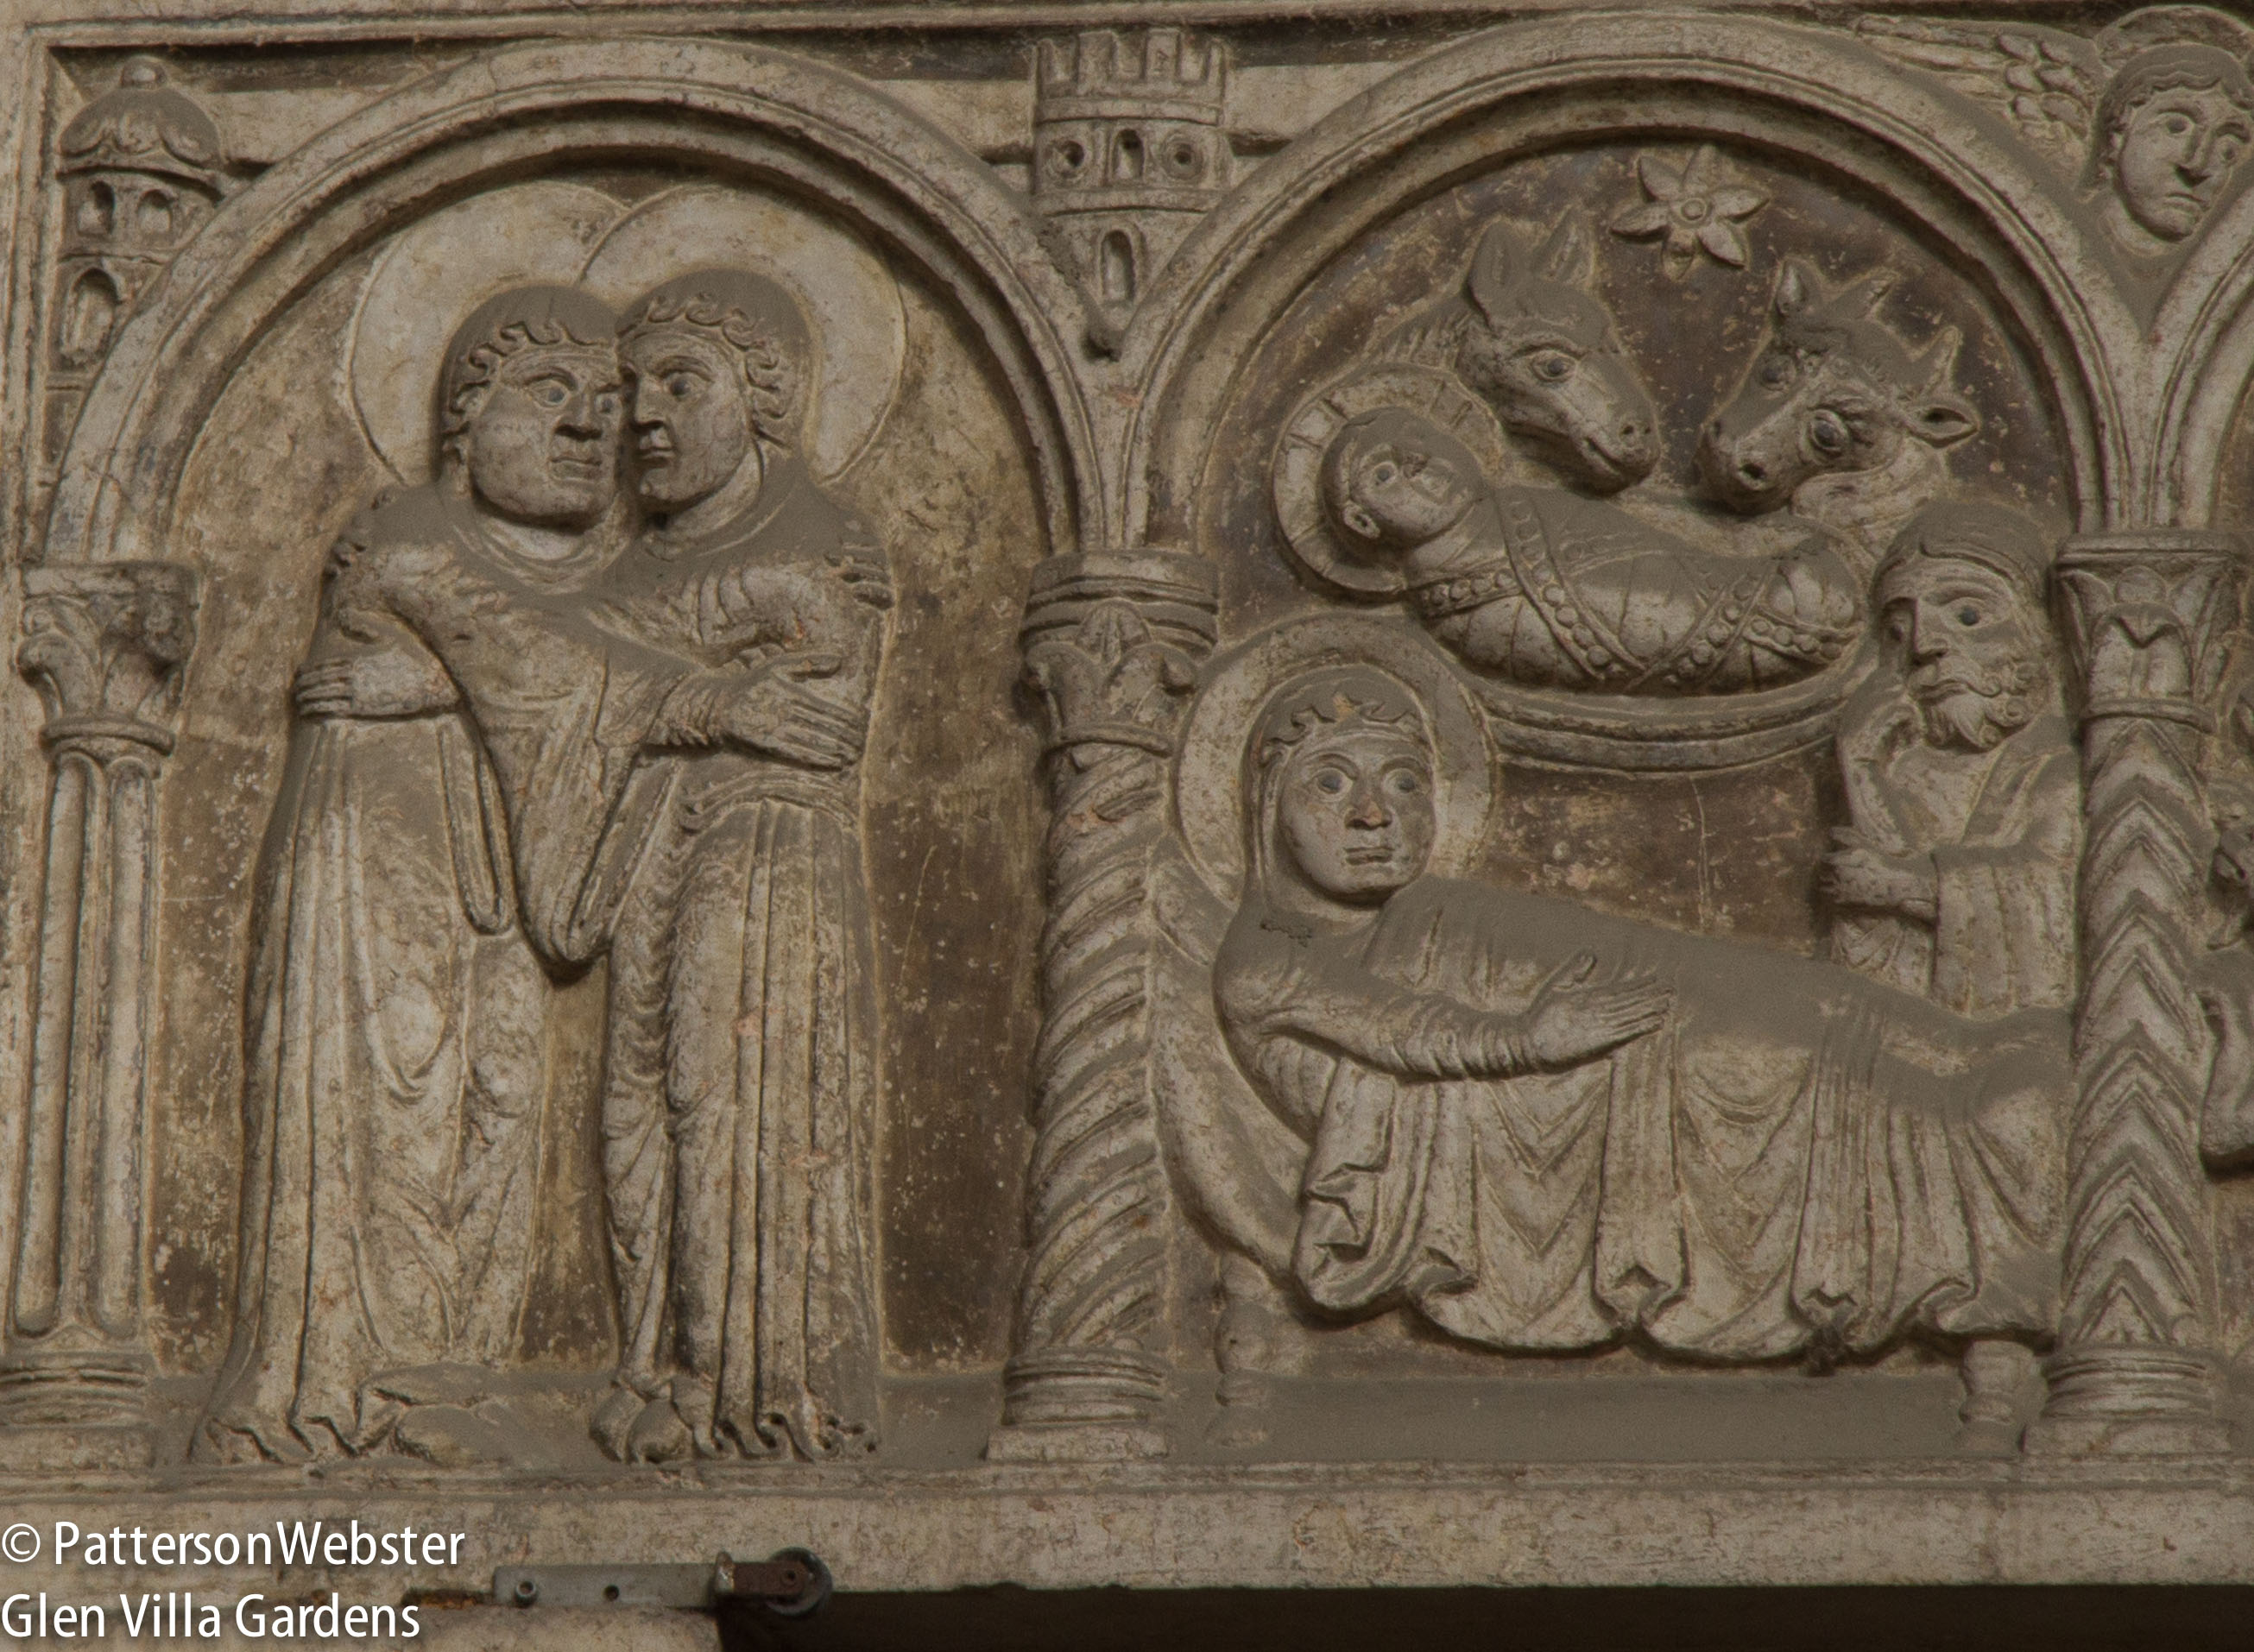 The nativity is on the right. I' m not sure what scene is shown on the left. Possibly  it is the marriage of Mary and Joseph.